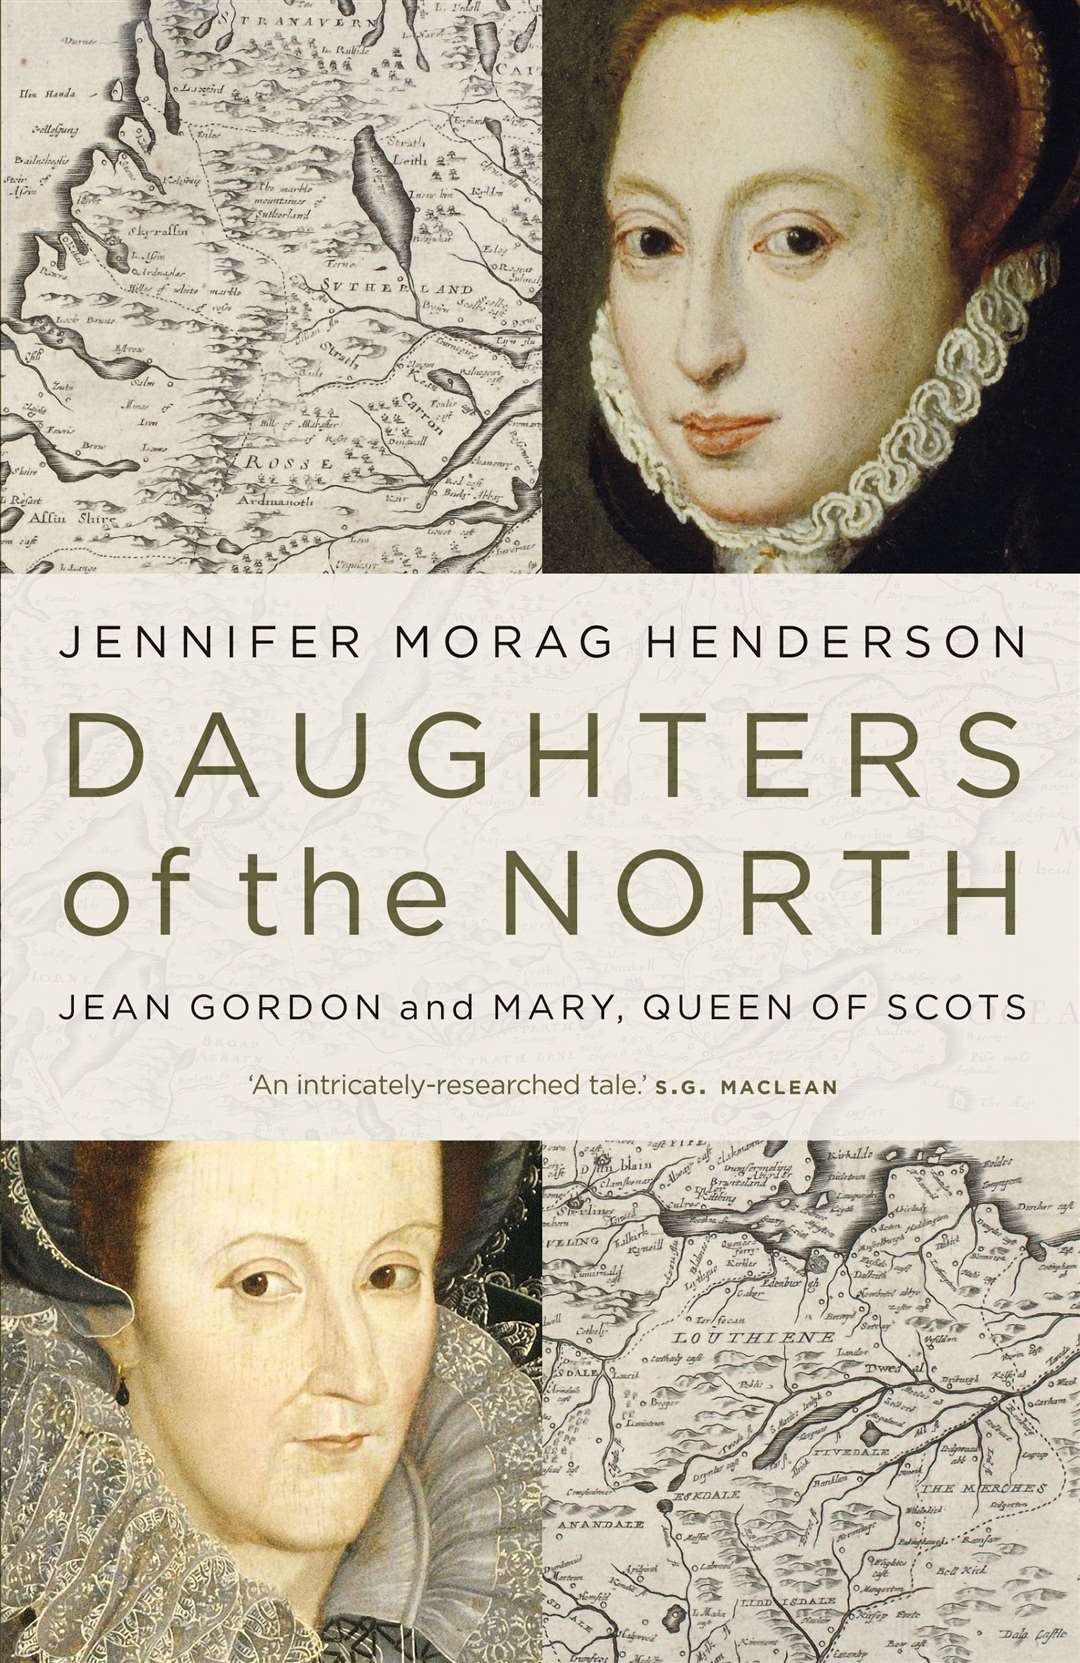 Jennifer Morag Henderson's new book, Daughters of the North.